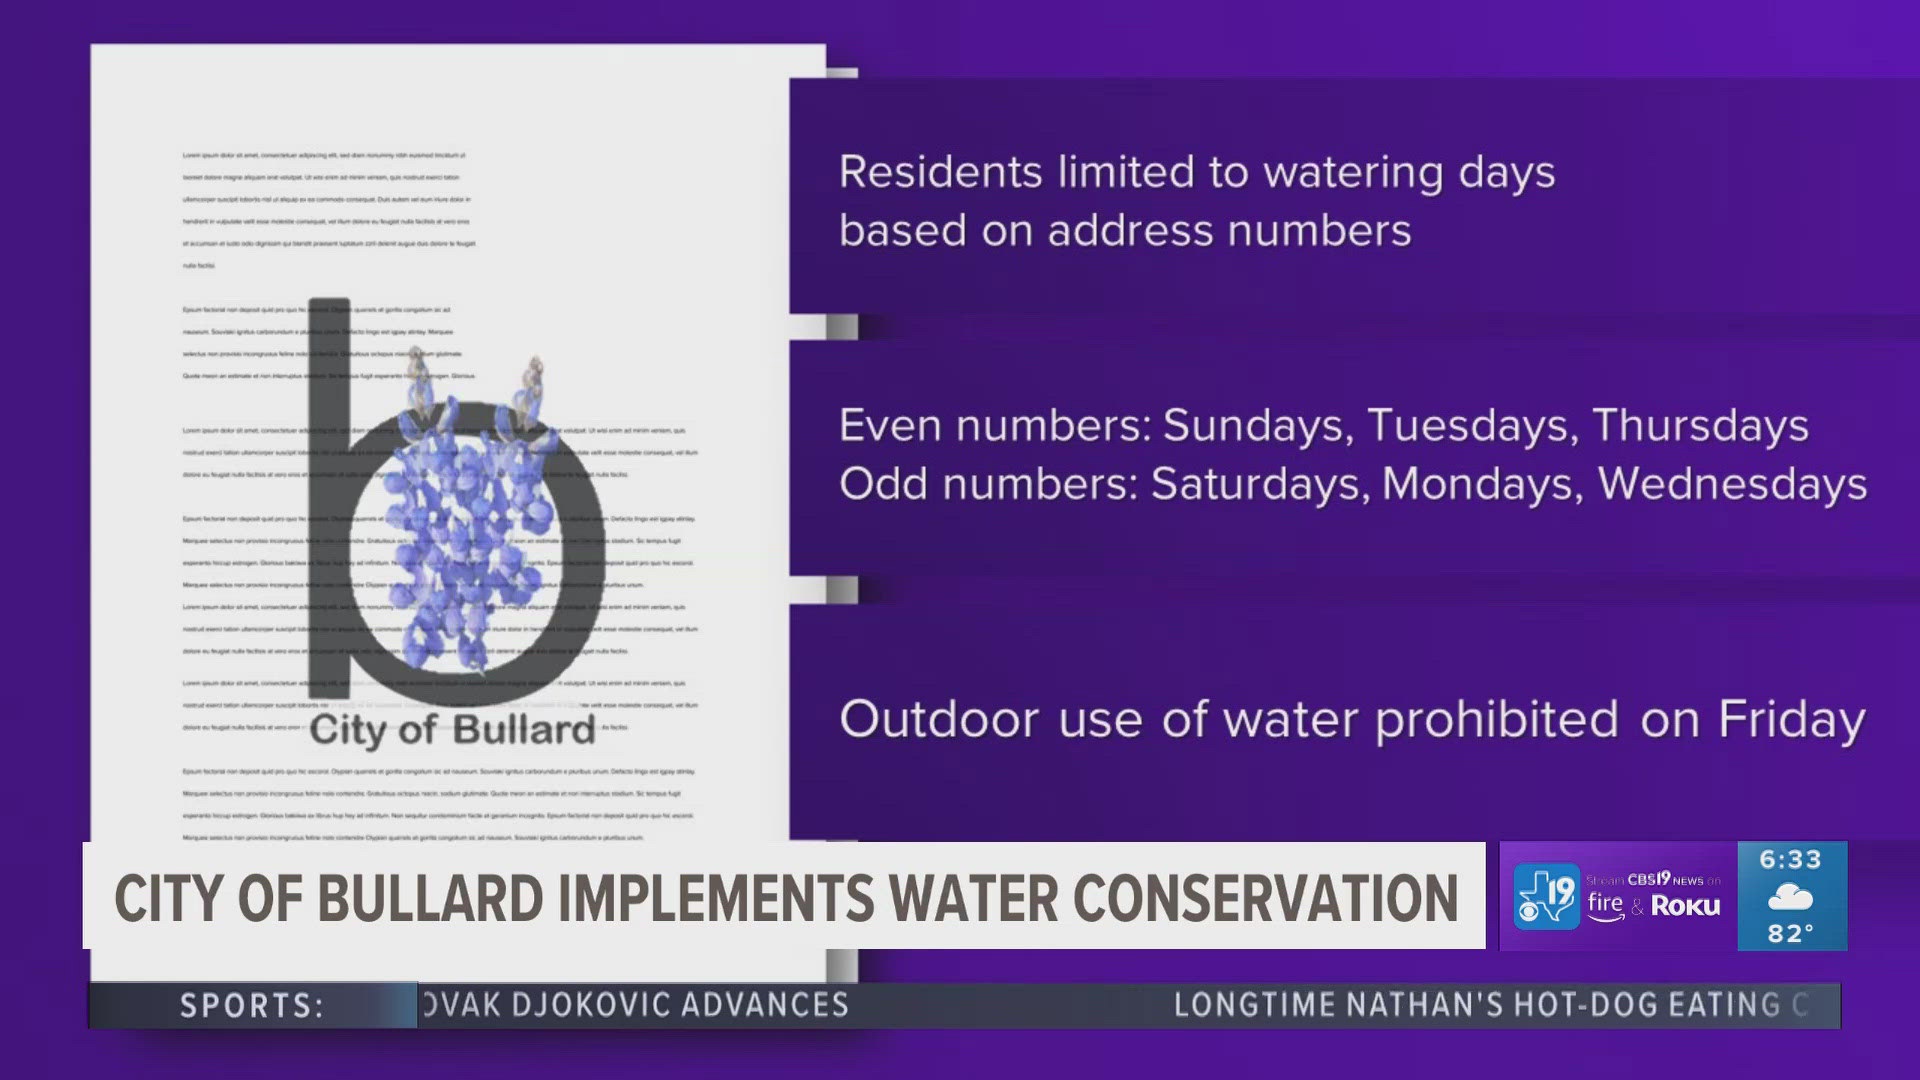 City of Bullard implements stage 1 water conservation efforts